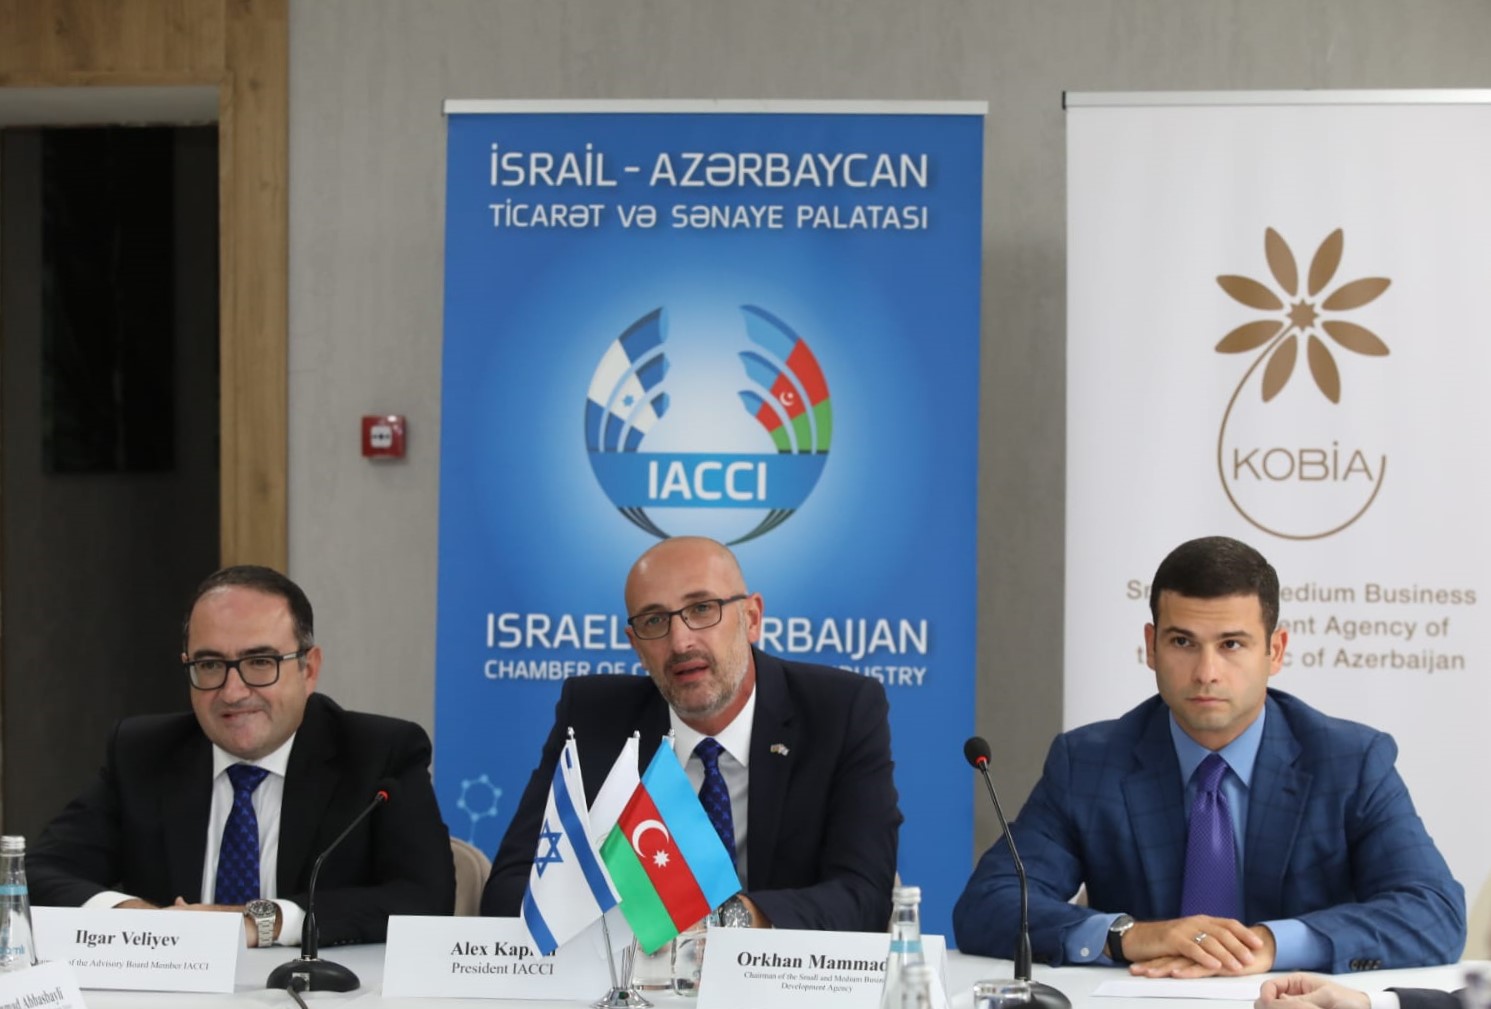 A memorandum was signed between KOBİA, the Federation of Israeli Chambers of Commerce and the Israel-Azerbaijan Chamber of Commerce and Industry 